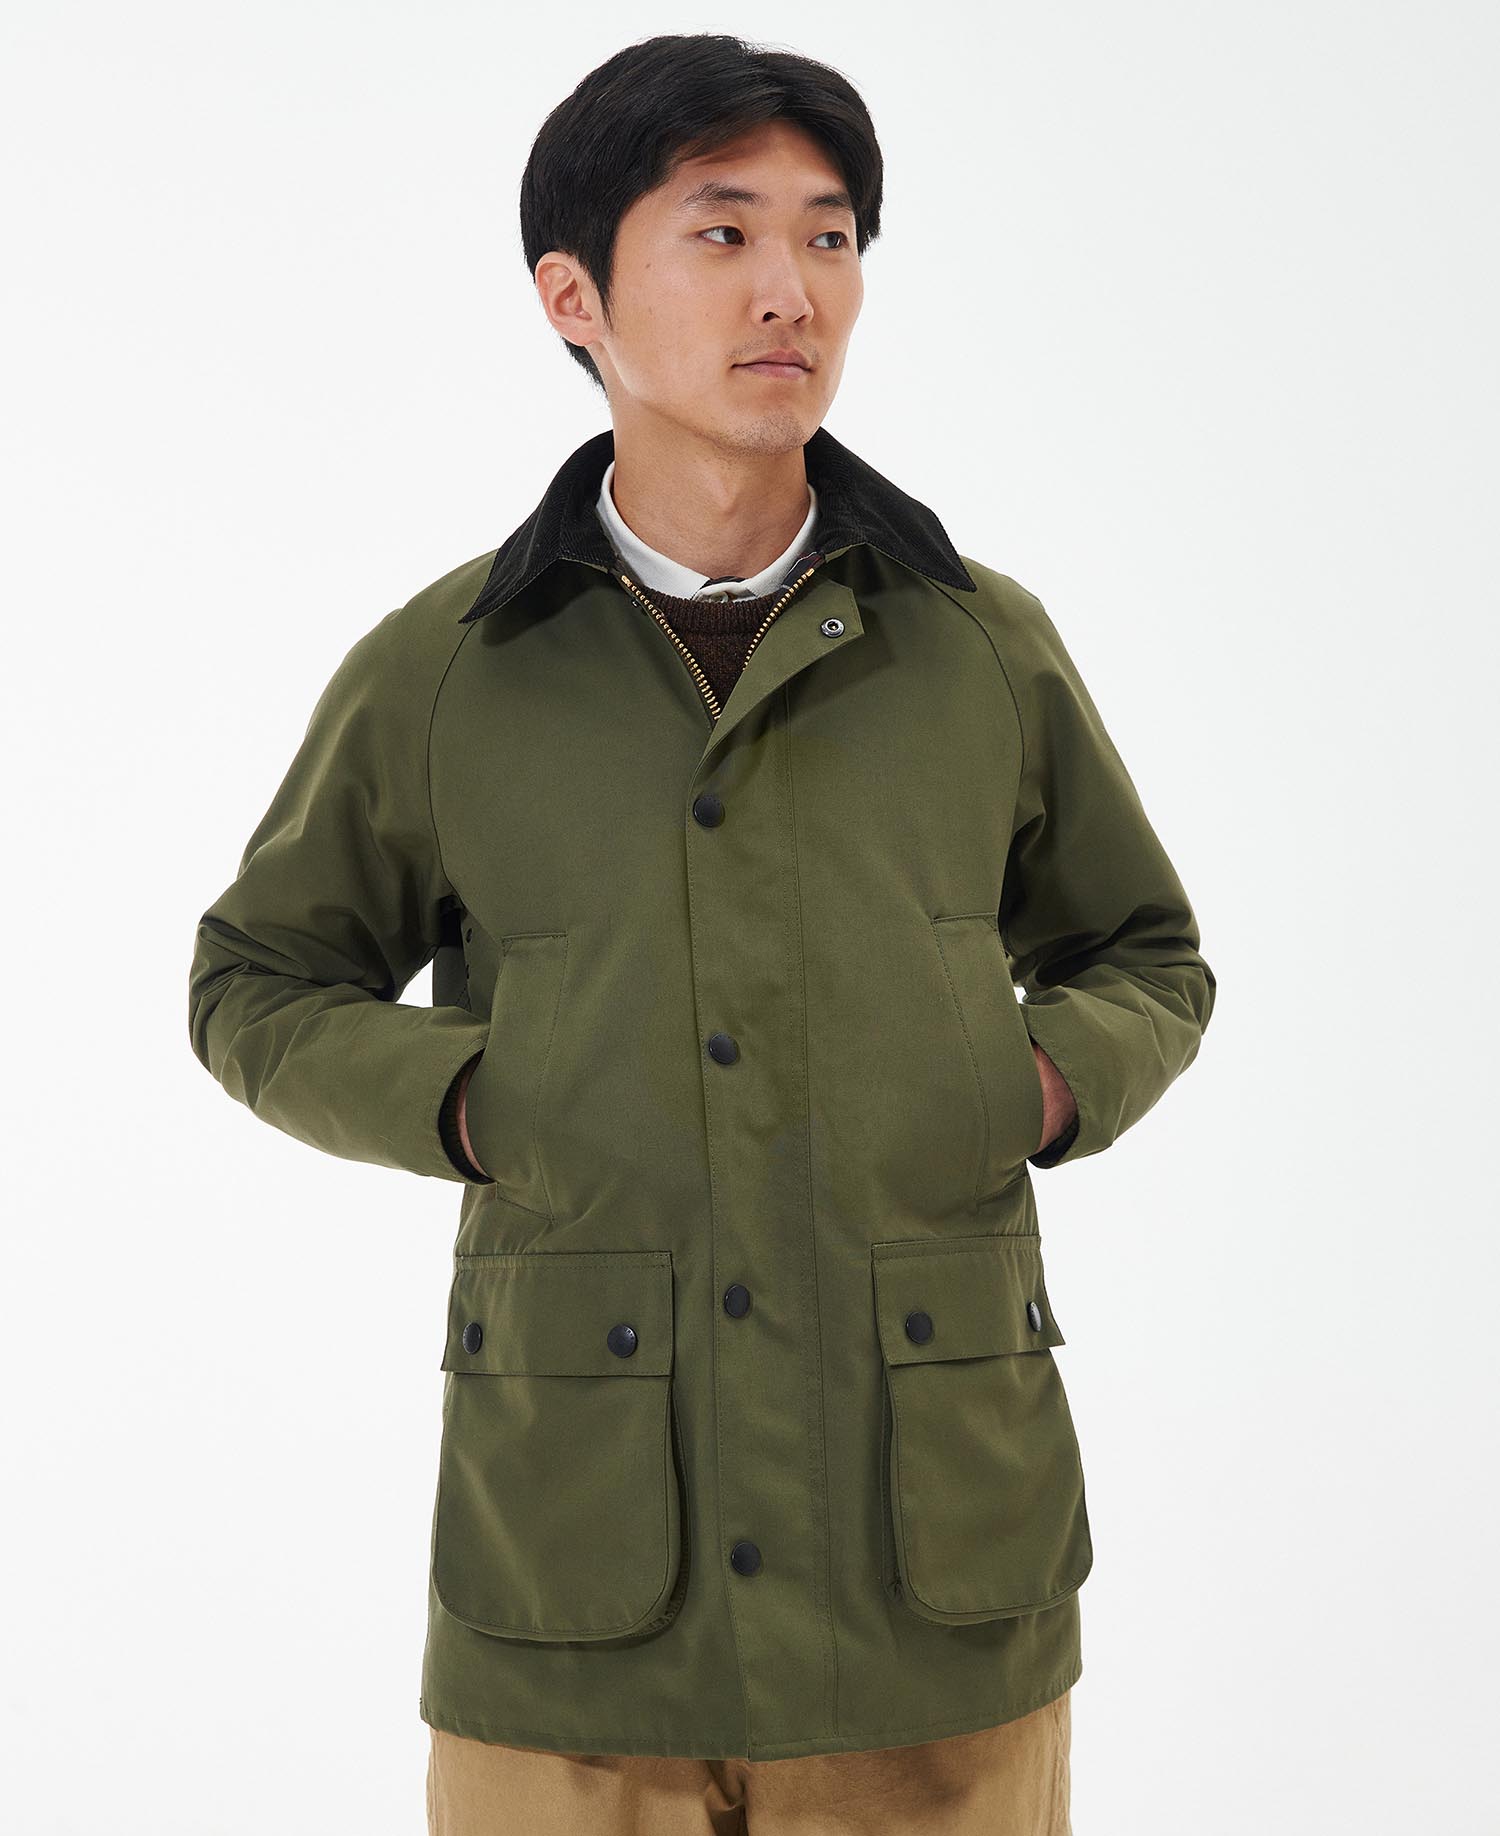 Shop the Barbour SL Bedale Casual Jacket in Green today. | Barbour